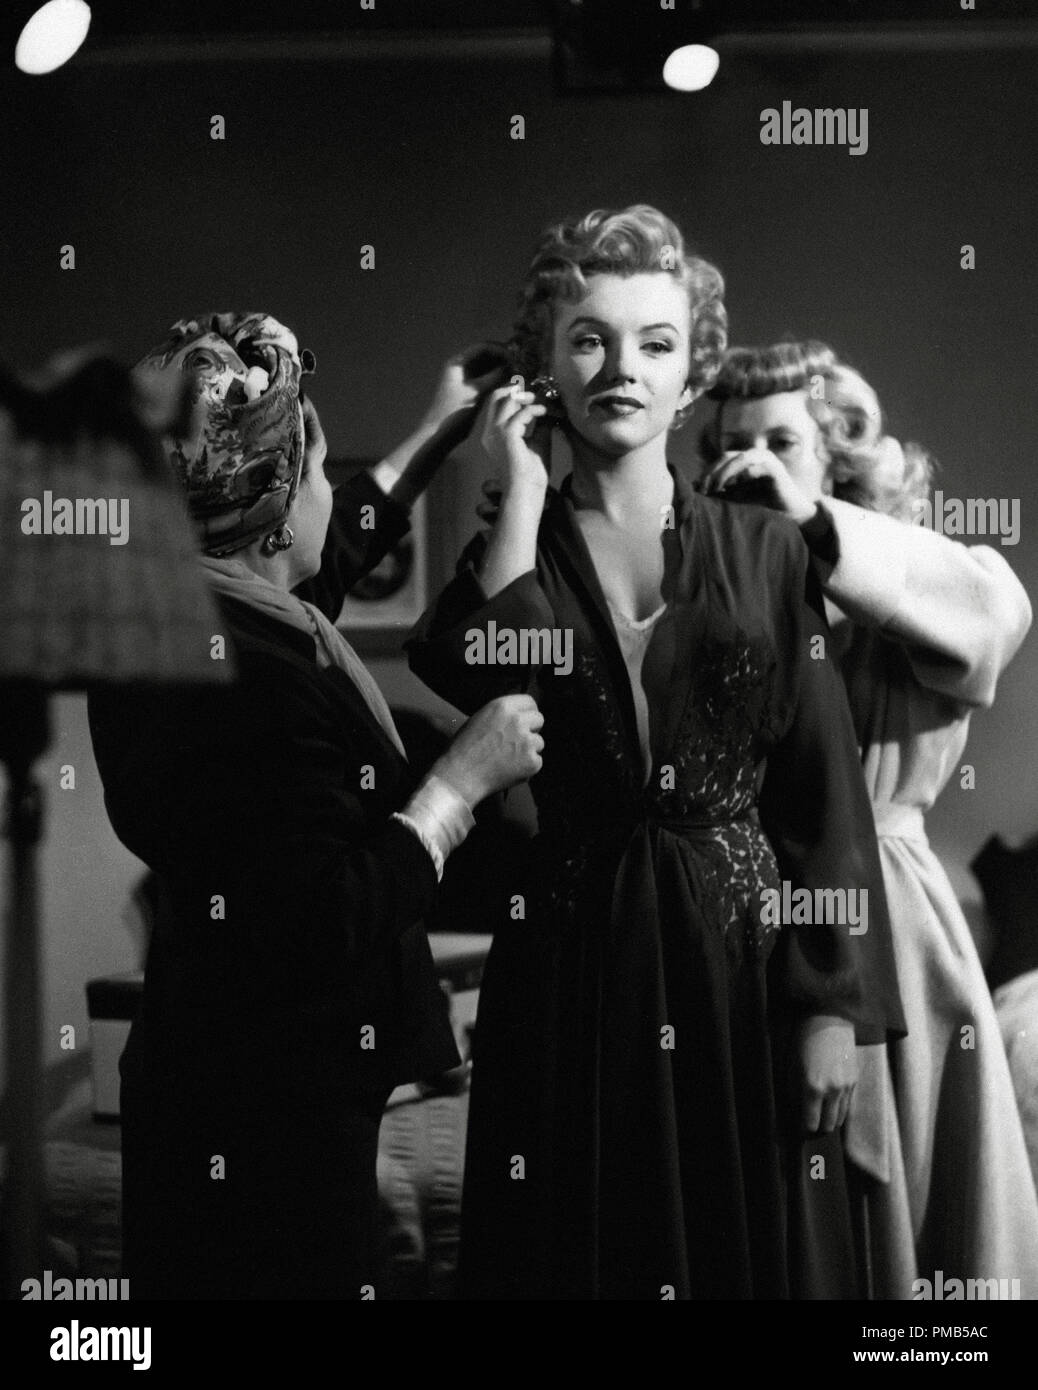 Marilyn Monroe, "Don't Bother to Knock" 1952 20th Century Fox File  Reference # 33536 465THA Stock Photo - Alamy